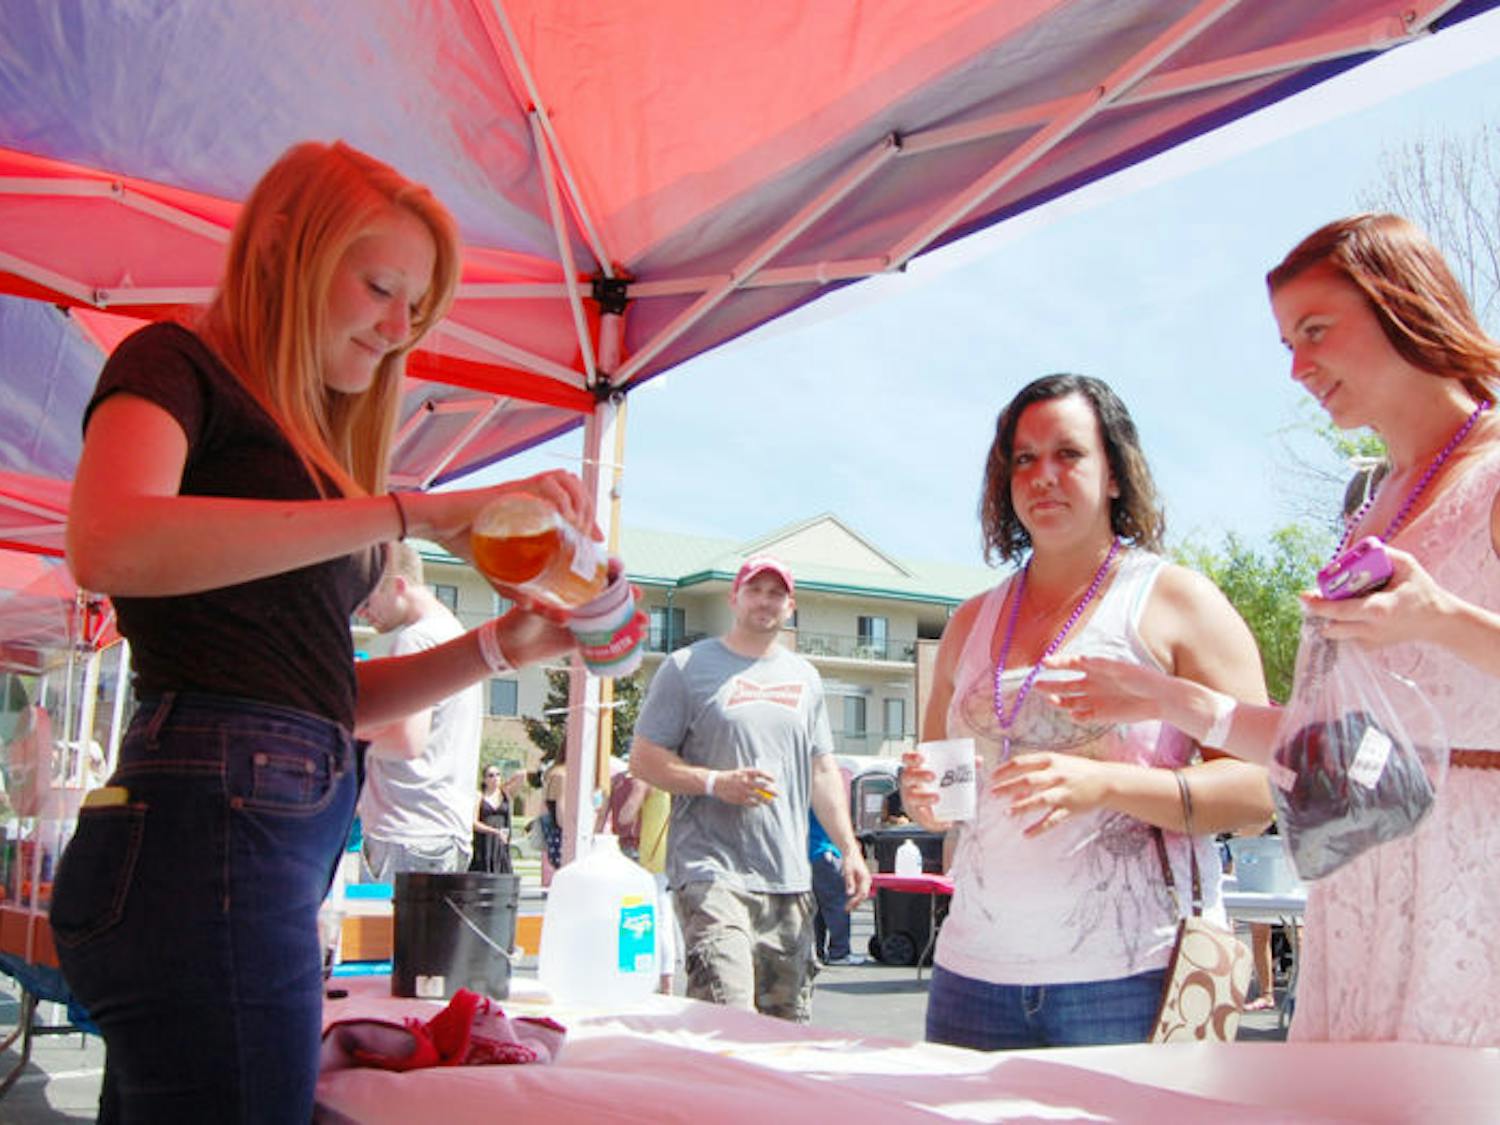 Emily Headrick, left, pours a patron a beer Saturday at the Burkhardt tent. Hundreds of beer lovers attended the 17th Greater Gator Beer Festival at Magnolia Park and received unlimited 2-ounce pours and food with admission. The festival almost didn’t happen this year due to late approval by the city.